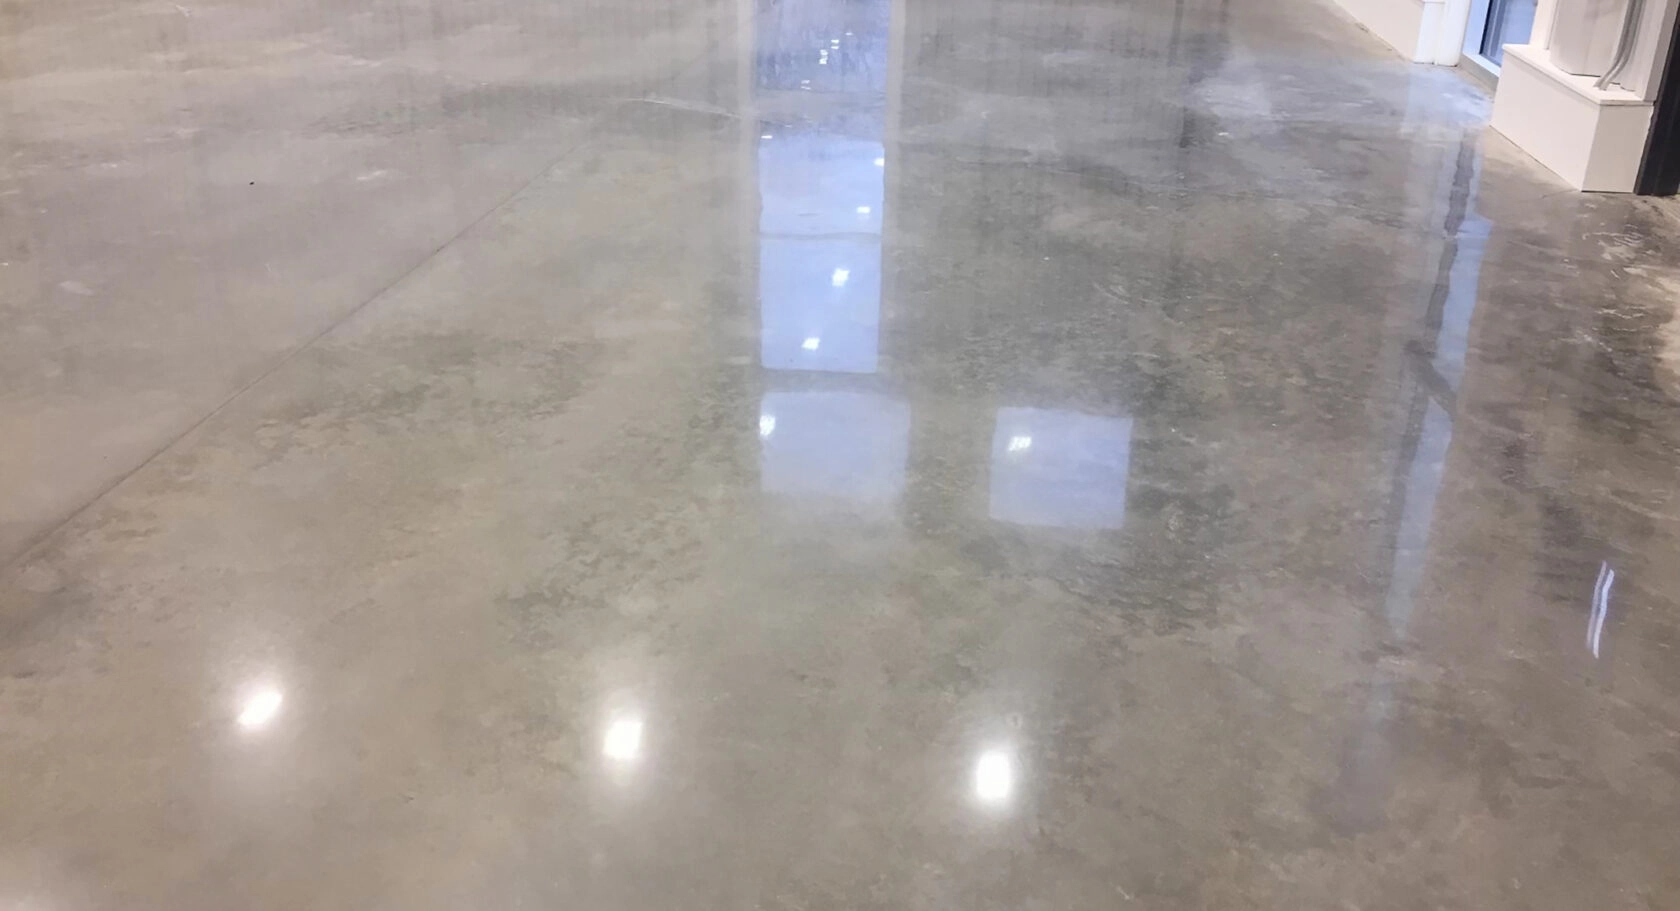 A Polished Concrete Floor in Massachusetts. Commercial concrete floor polishing by Dex by Terra.